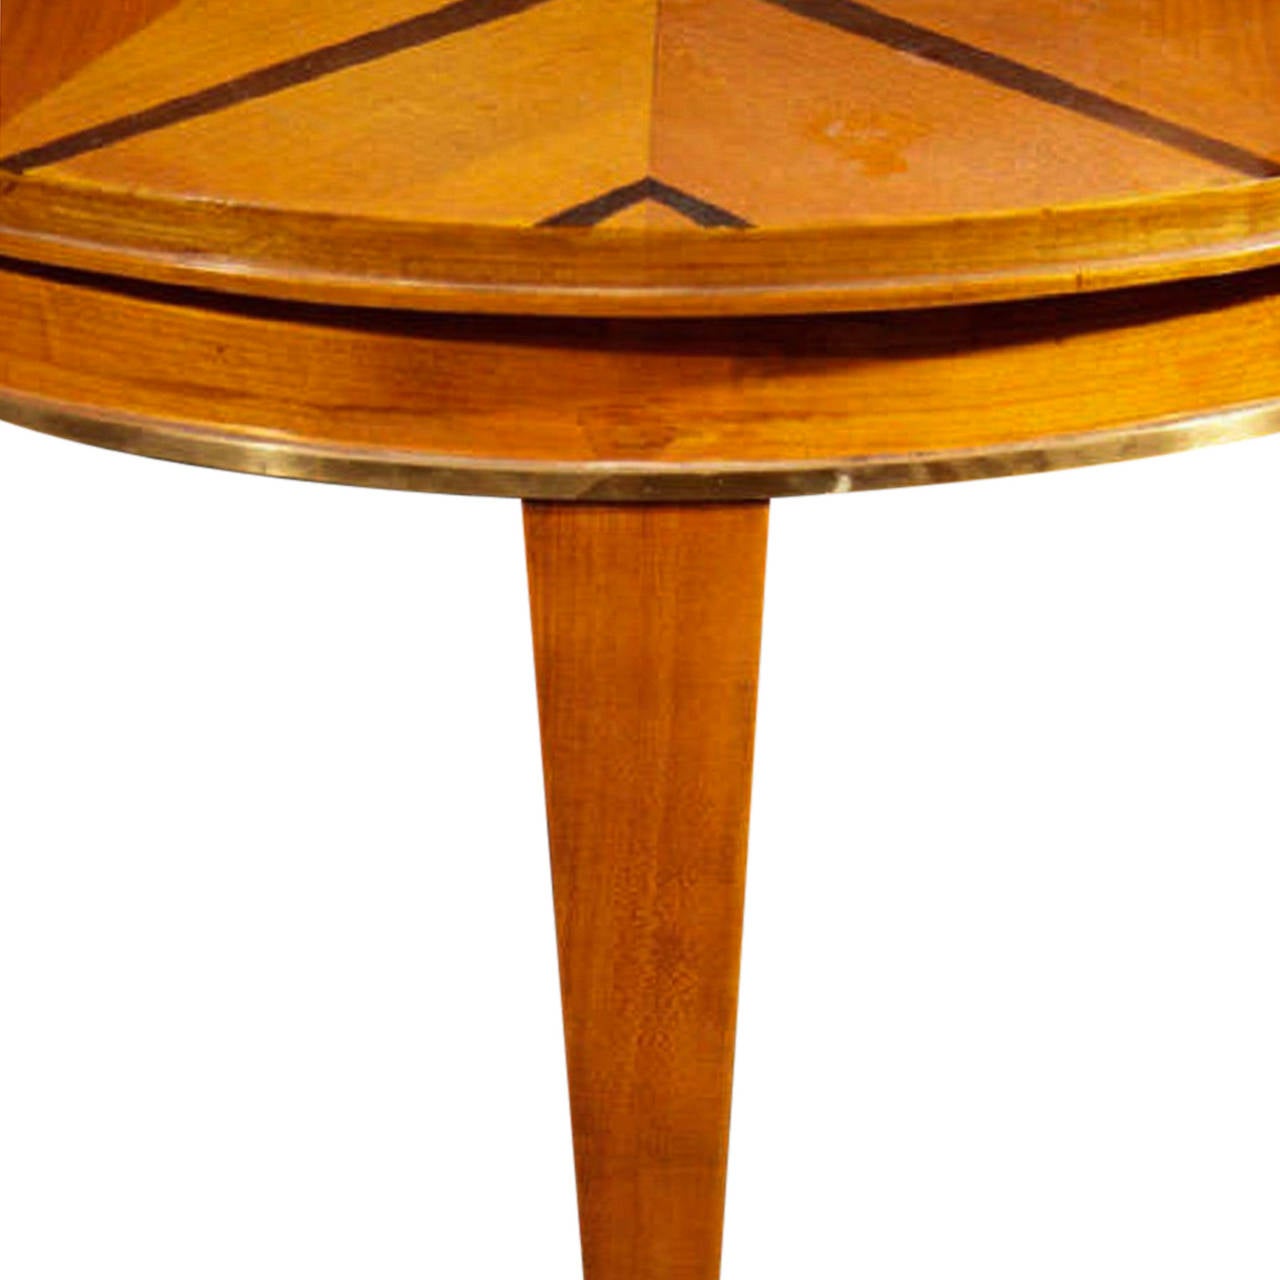 Sycamore circular center table with dark stained starburst pattern created with dark rosewood inlay, tapered legs and bronze sabots by Dominique, French, 1930s. Measures: 41 ½" diameter, 28 ½" height.
 